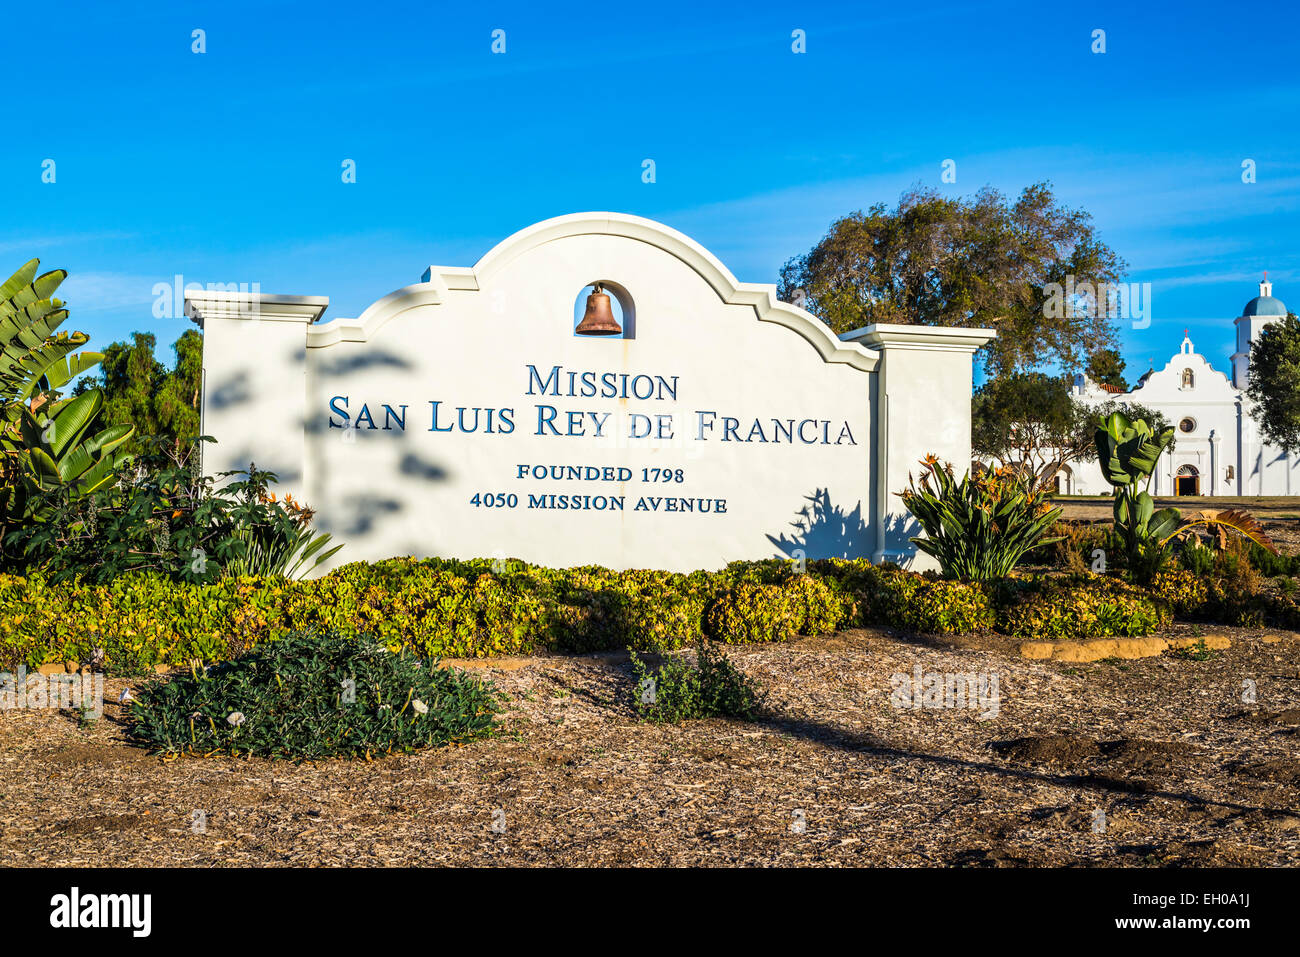 Mission San Luis Rey De Francia (founded 1798) sign. Oceanside, California, United States. Stock Photo